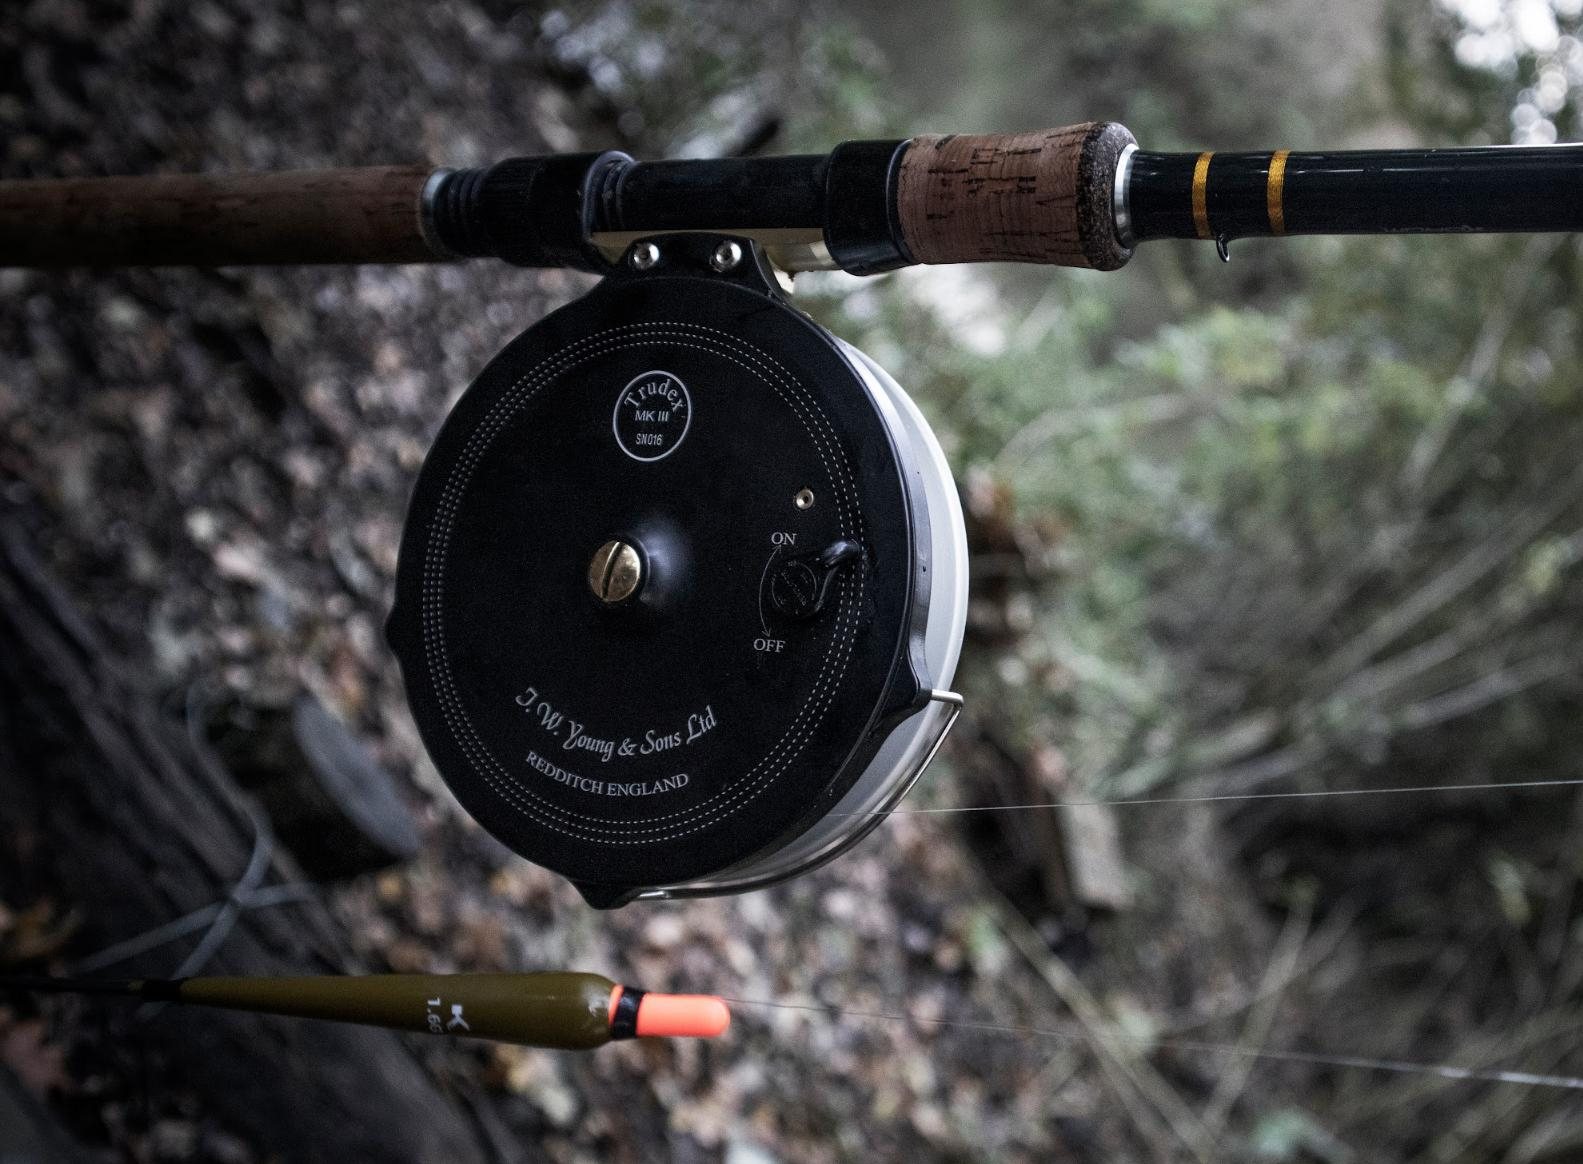 Should you buy centrepin reels for coarse angling?